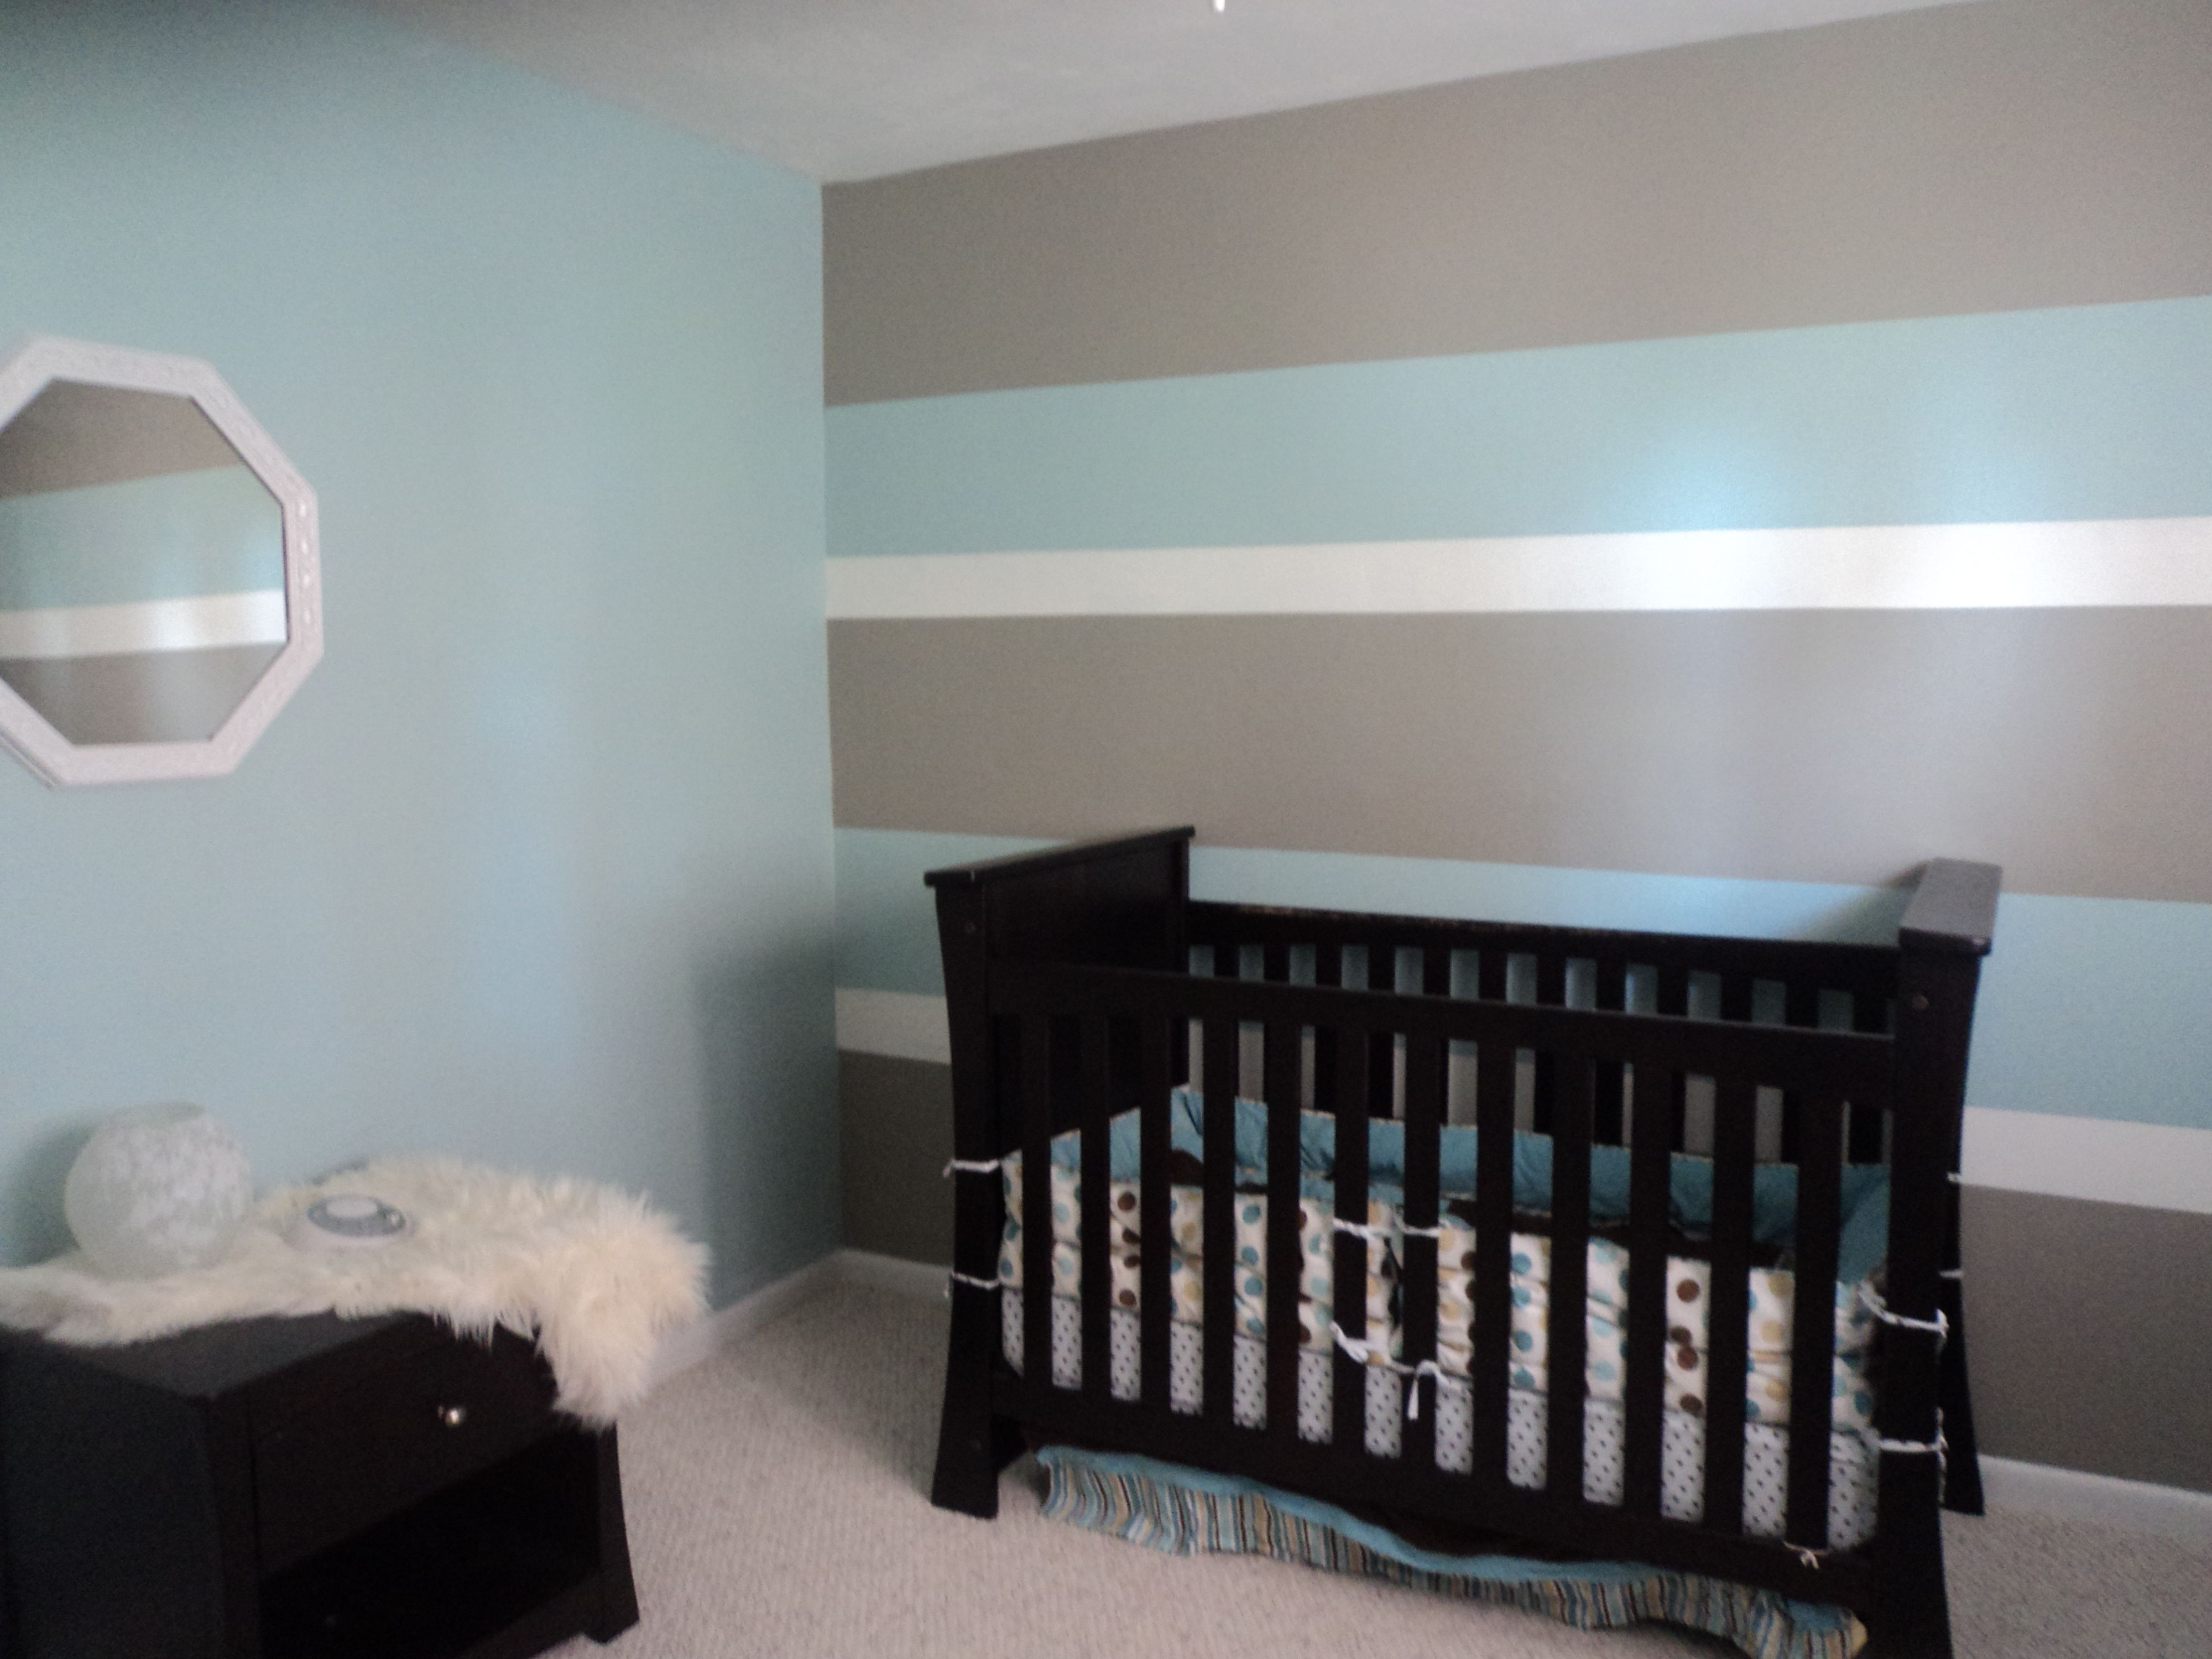 Horizontal Stripes Wall Accents Within Most Recently Released My Son's First Nurseryhubby And I Painted 3 Toned Horizontal (View 8 of 15)